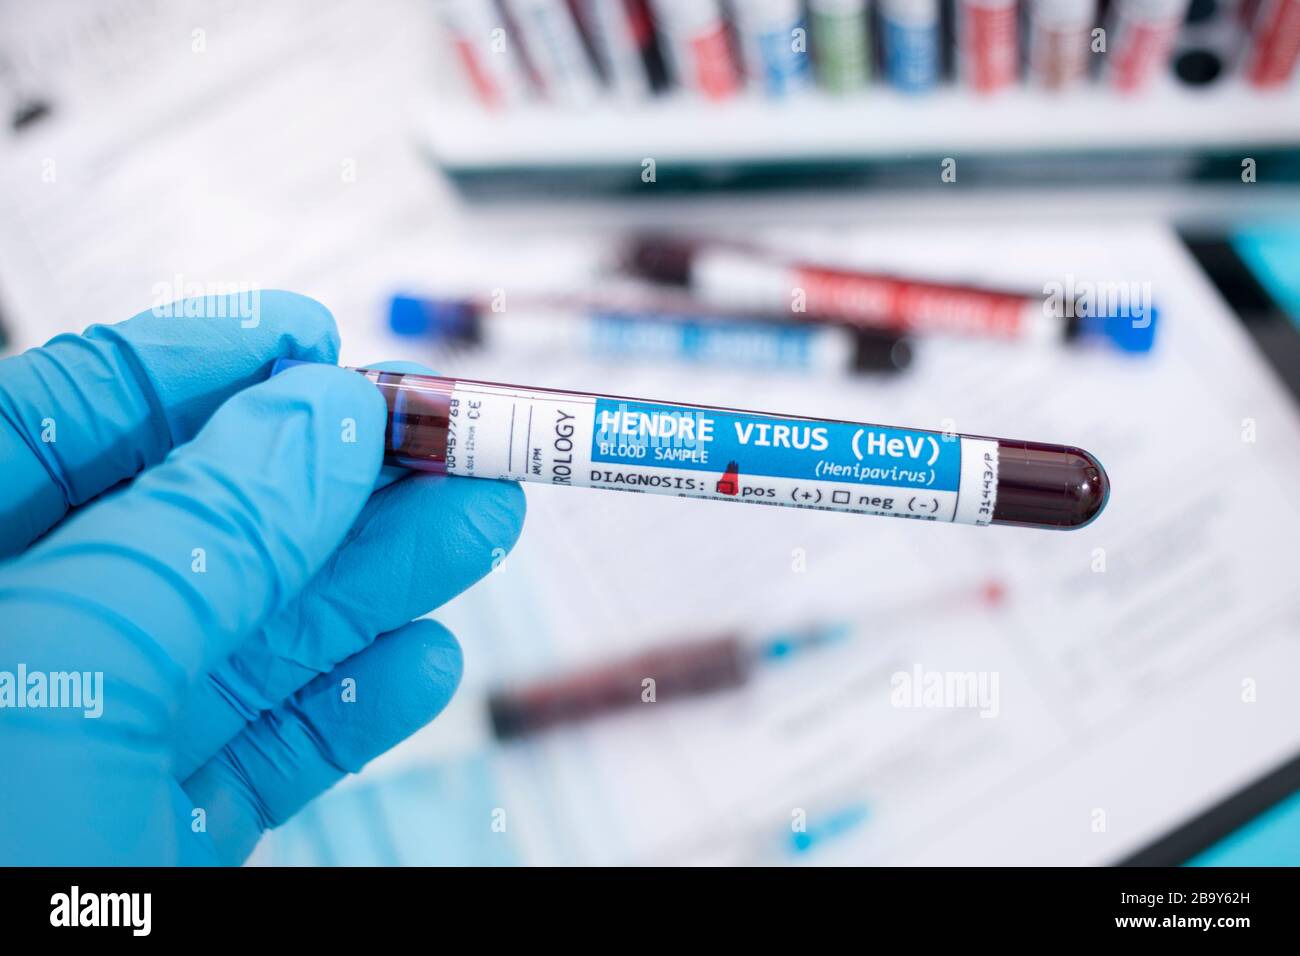 Fictional Blood samples with infected hendre virus, with stethoscope, mask and syringe and other stuff. Stock Photo